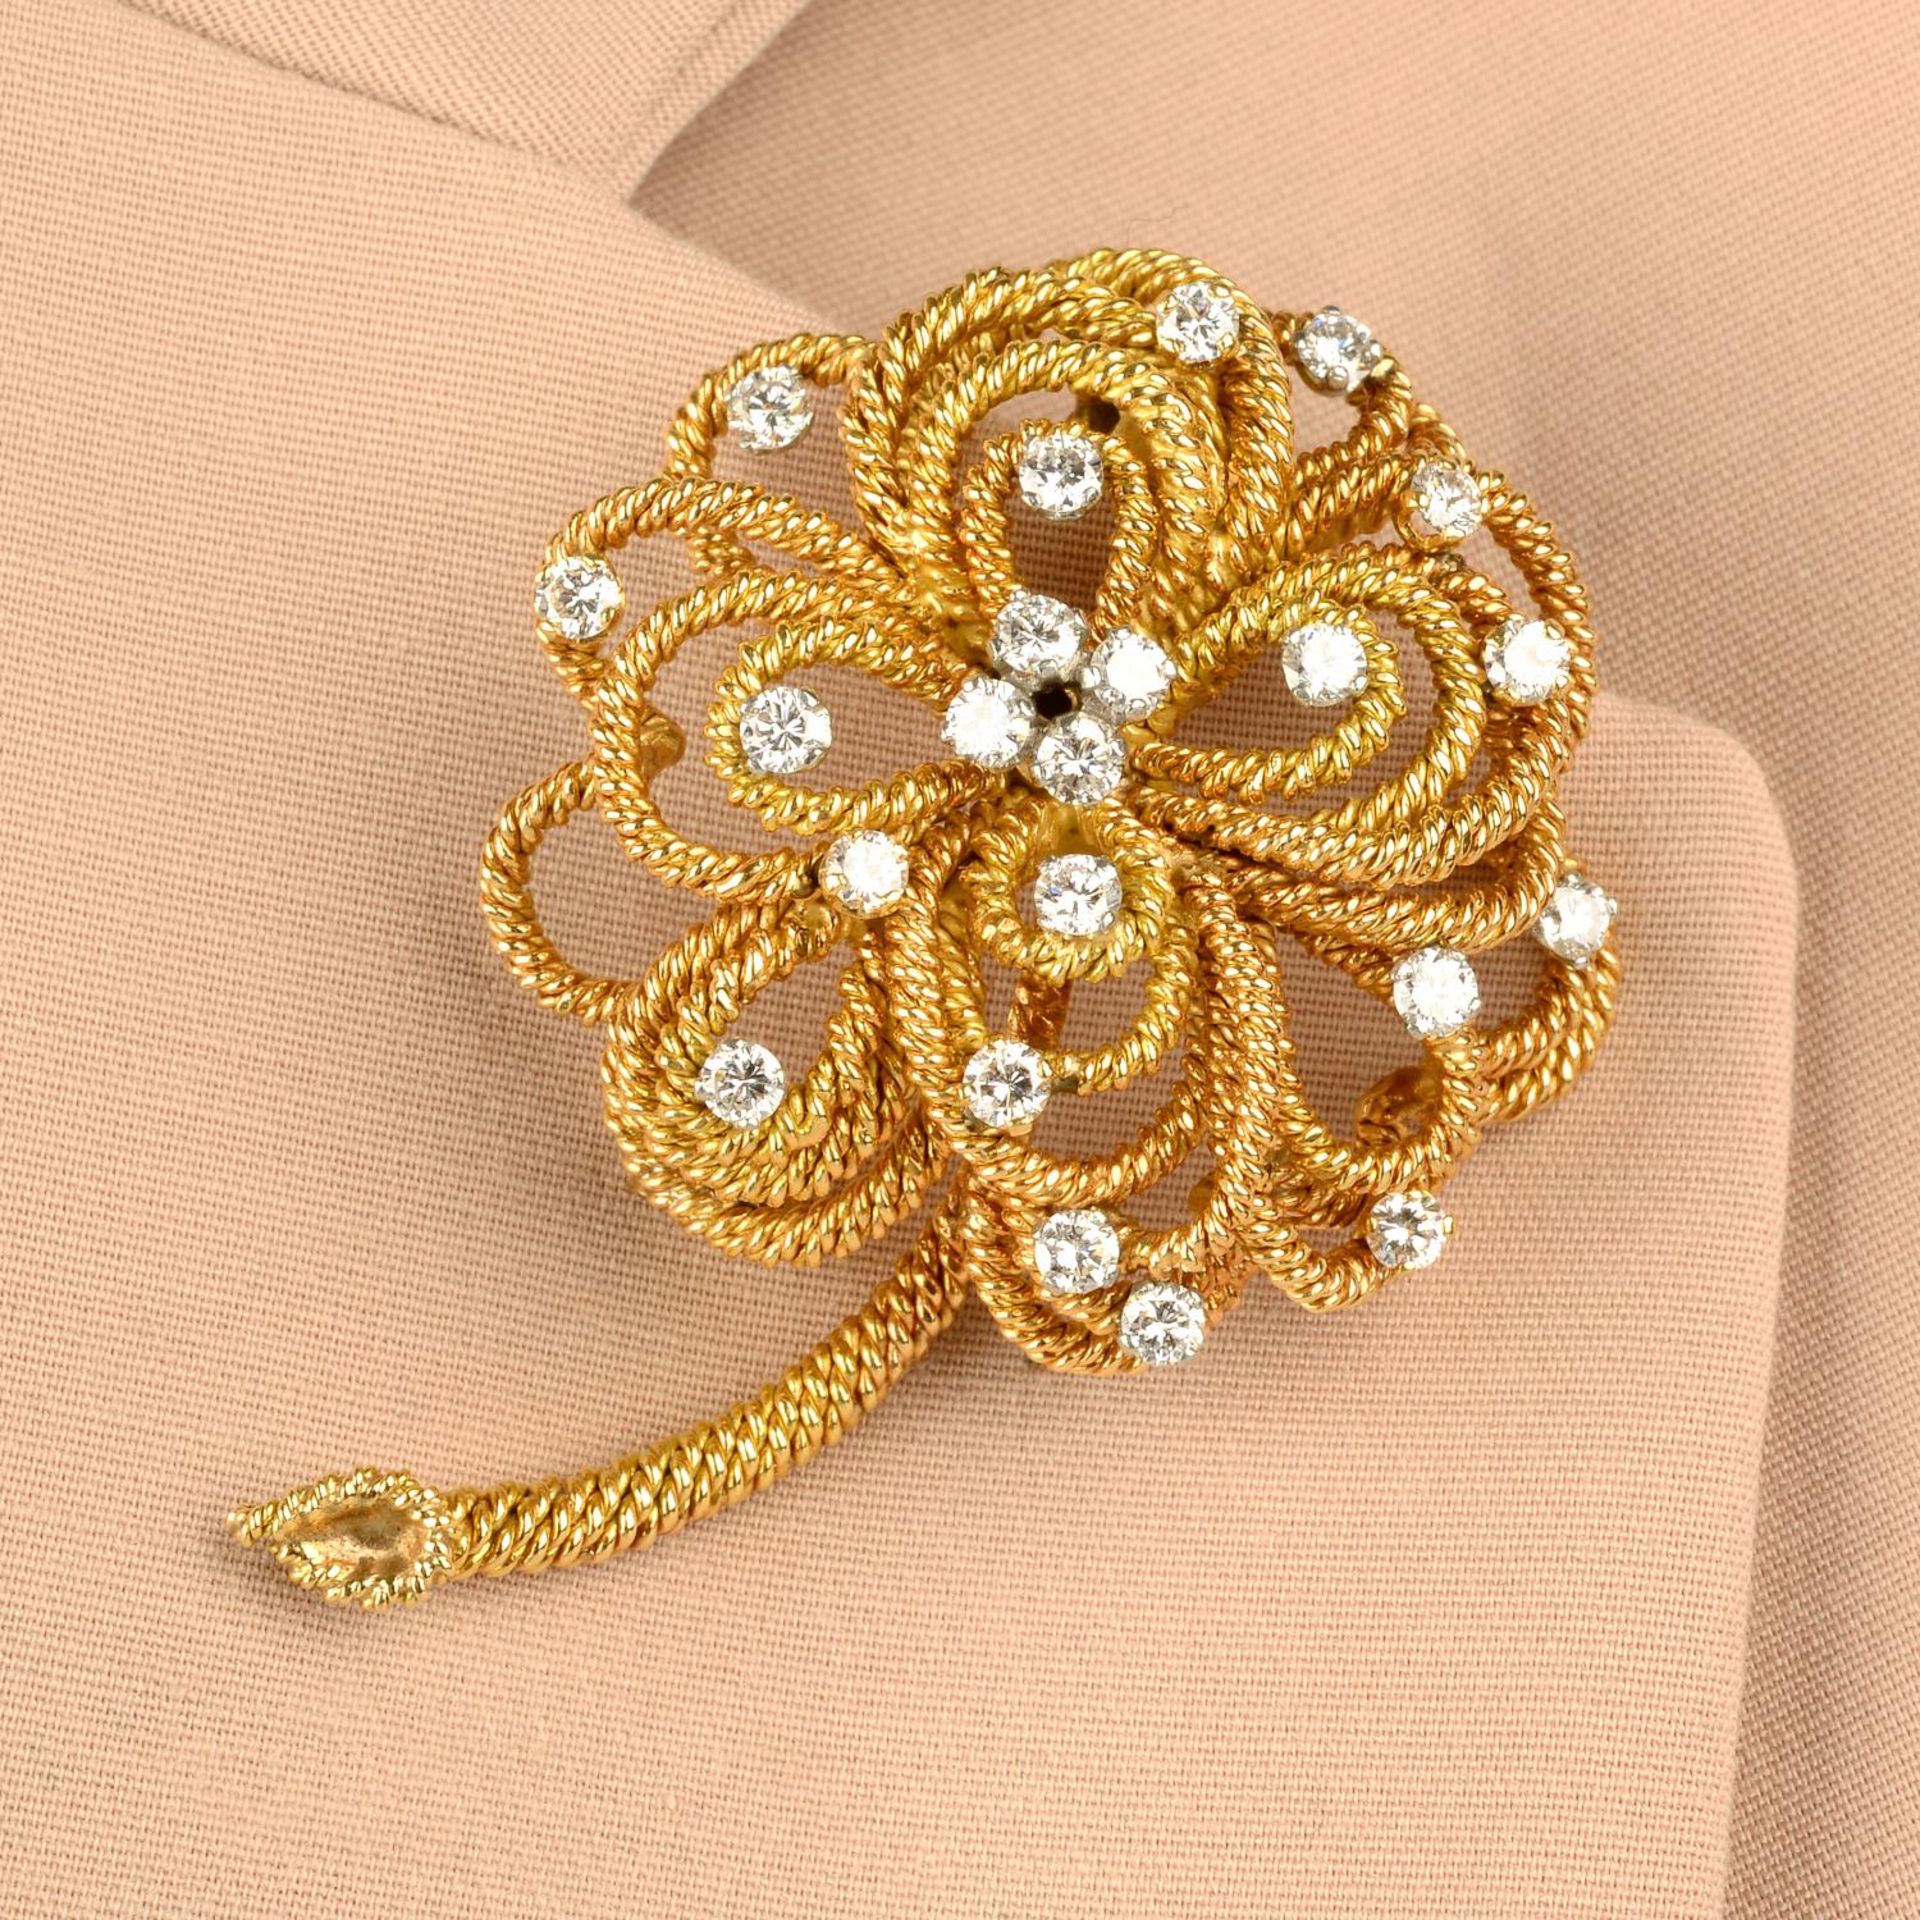 A mid 20th century diamond floral brooch, by Vourakis.